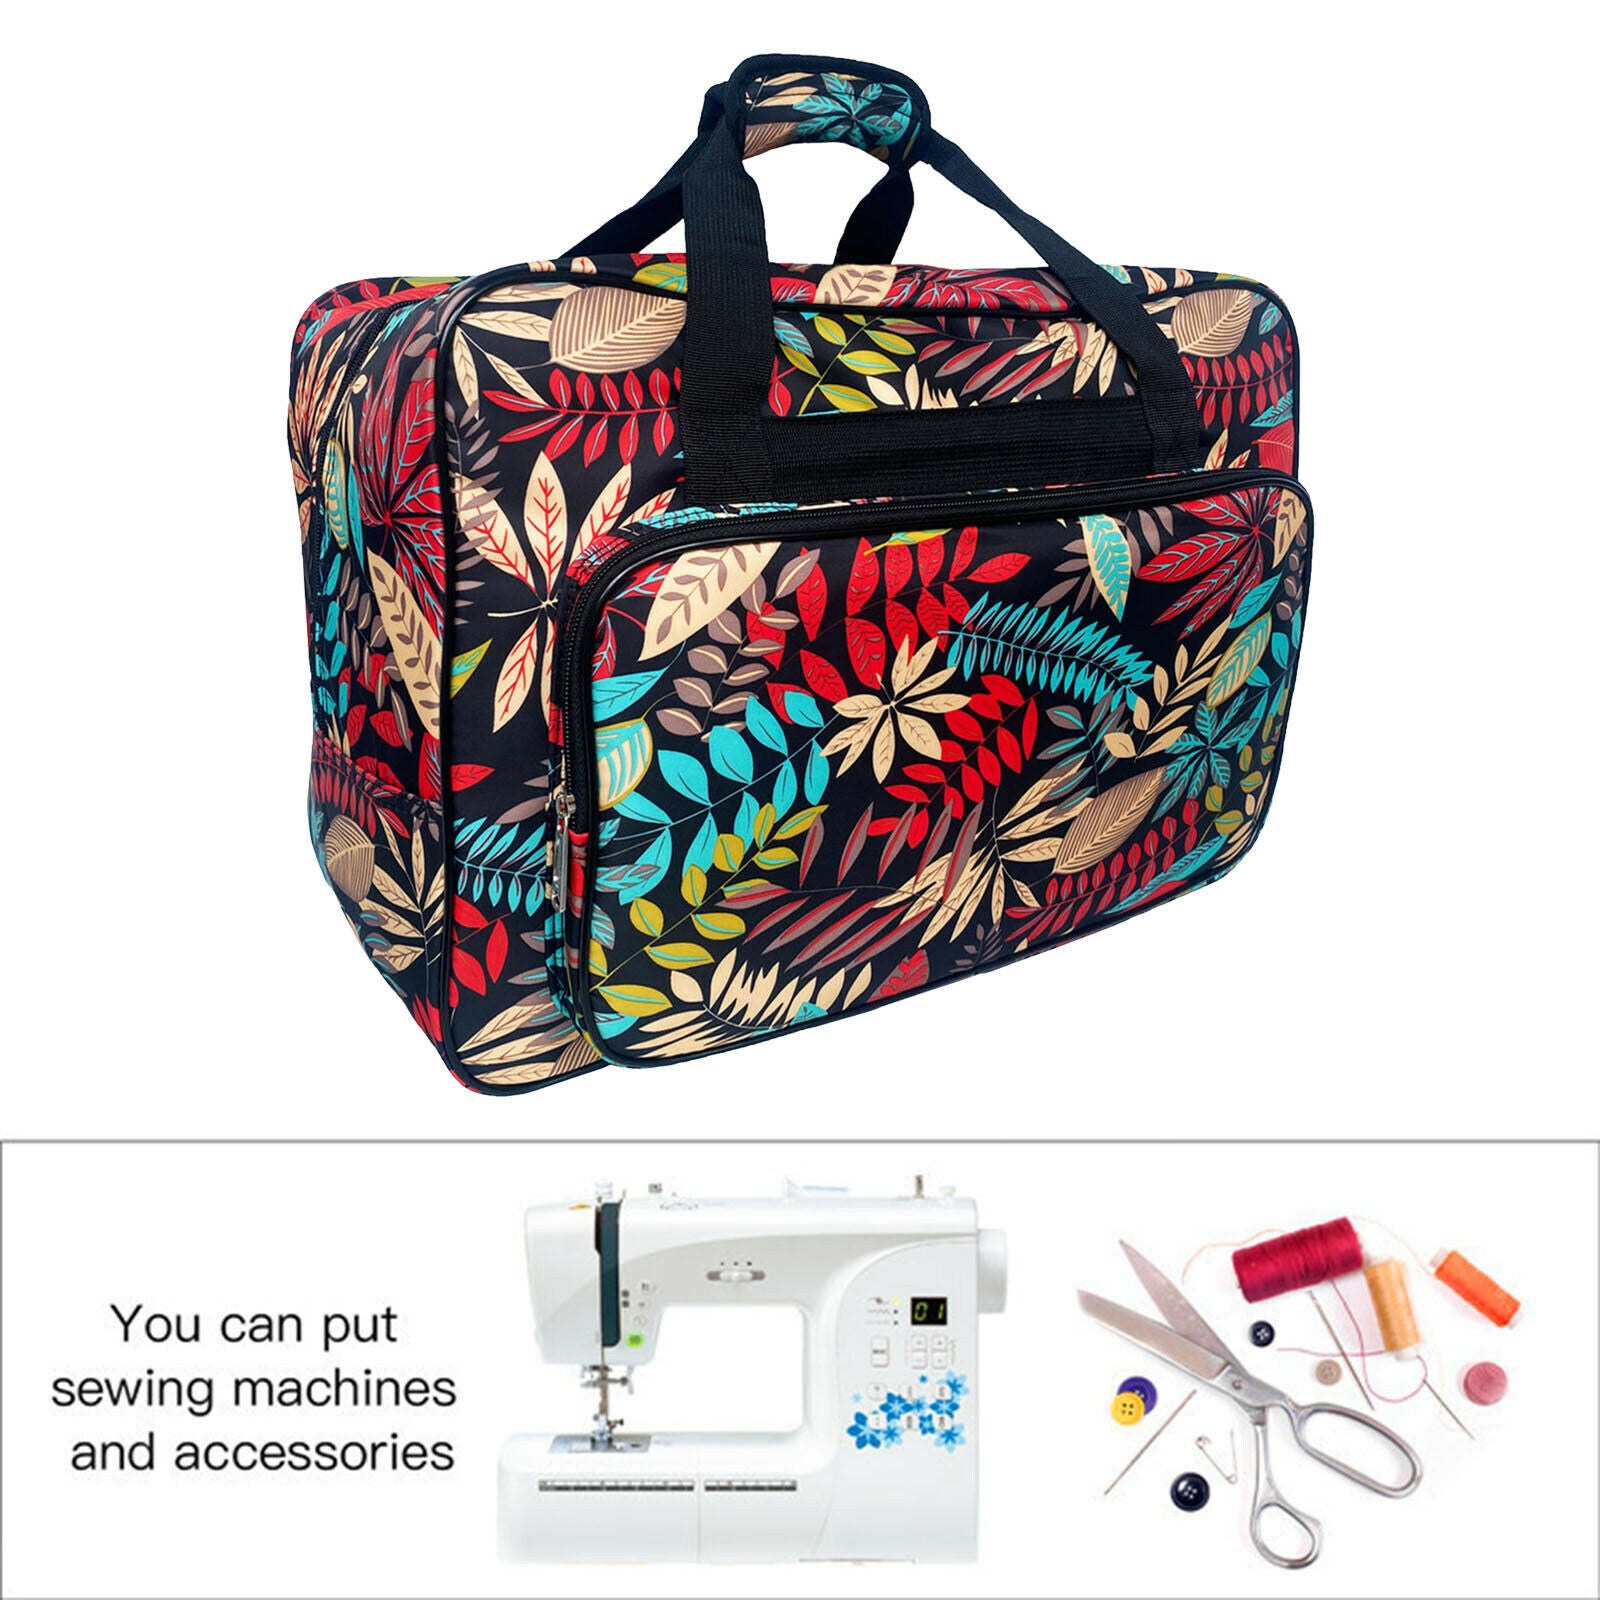 Sewing Machine Carry Bag 46x23x32cm Sew Machine Tote Universal Carrying Case